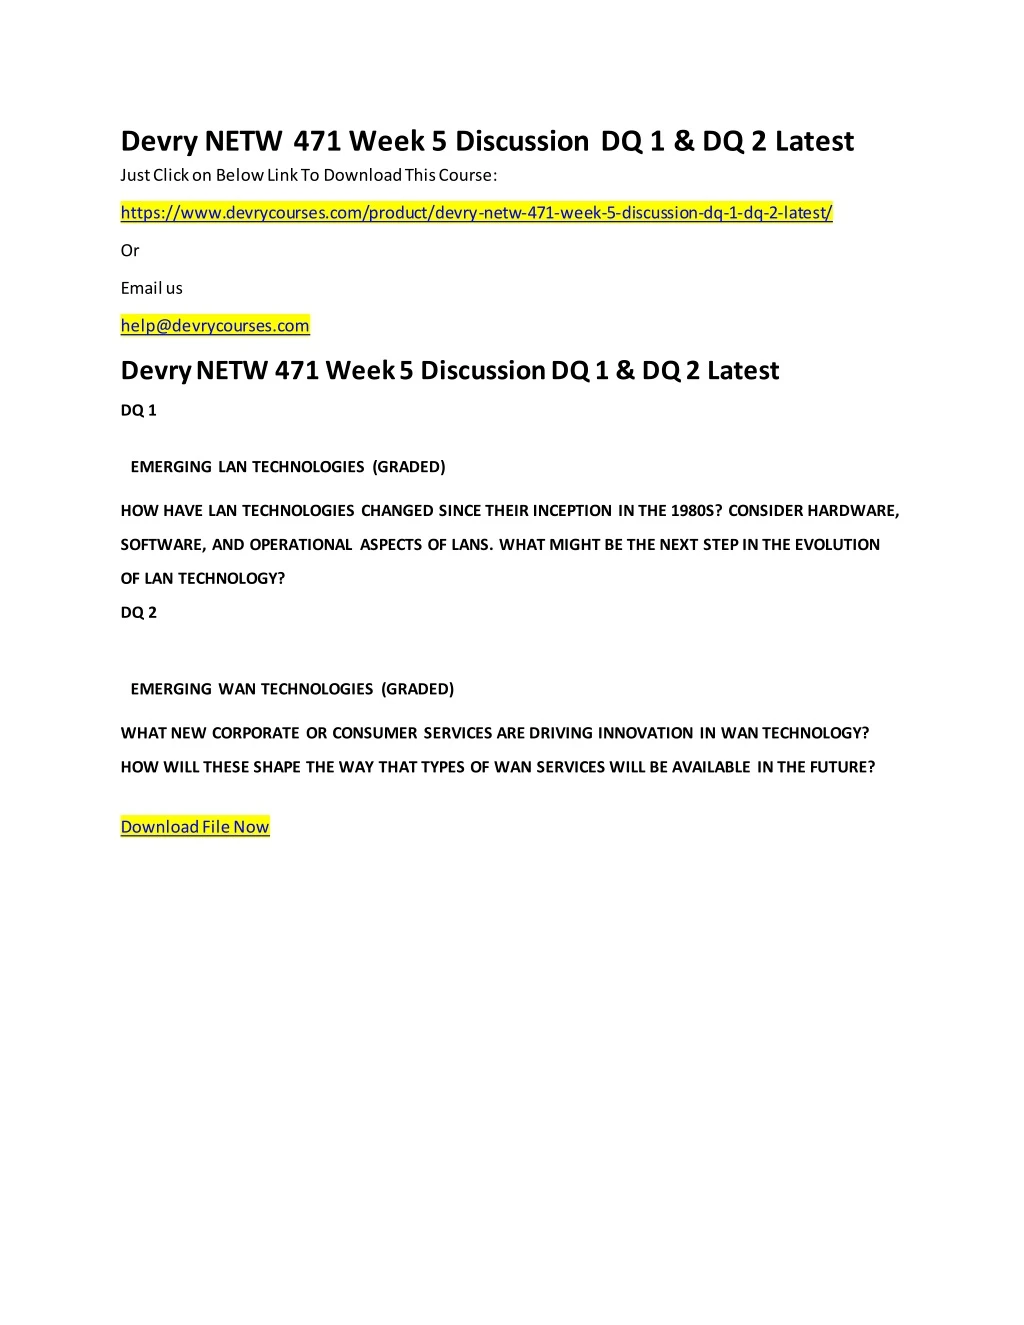 devry netw 471 week 5 discussion dq 1 dq 2 latest